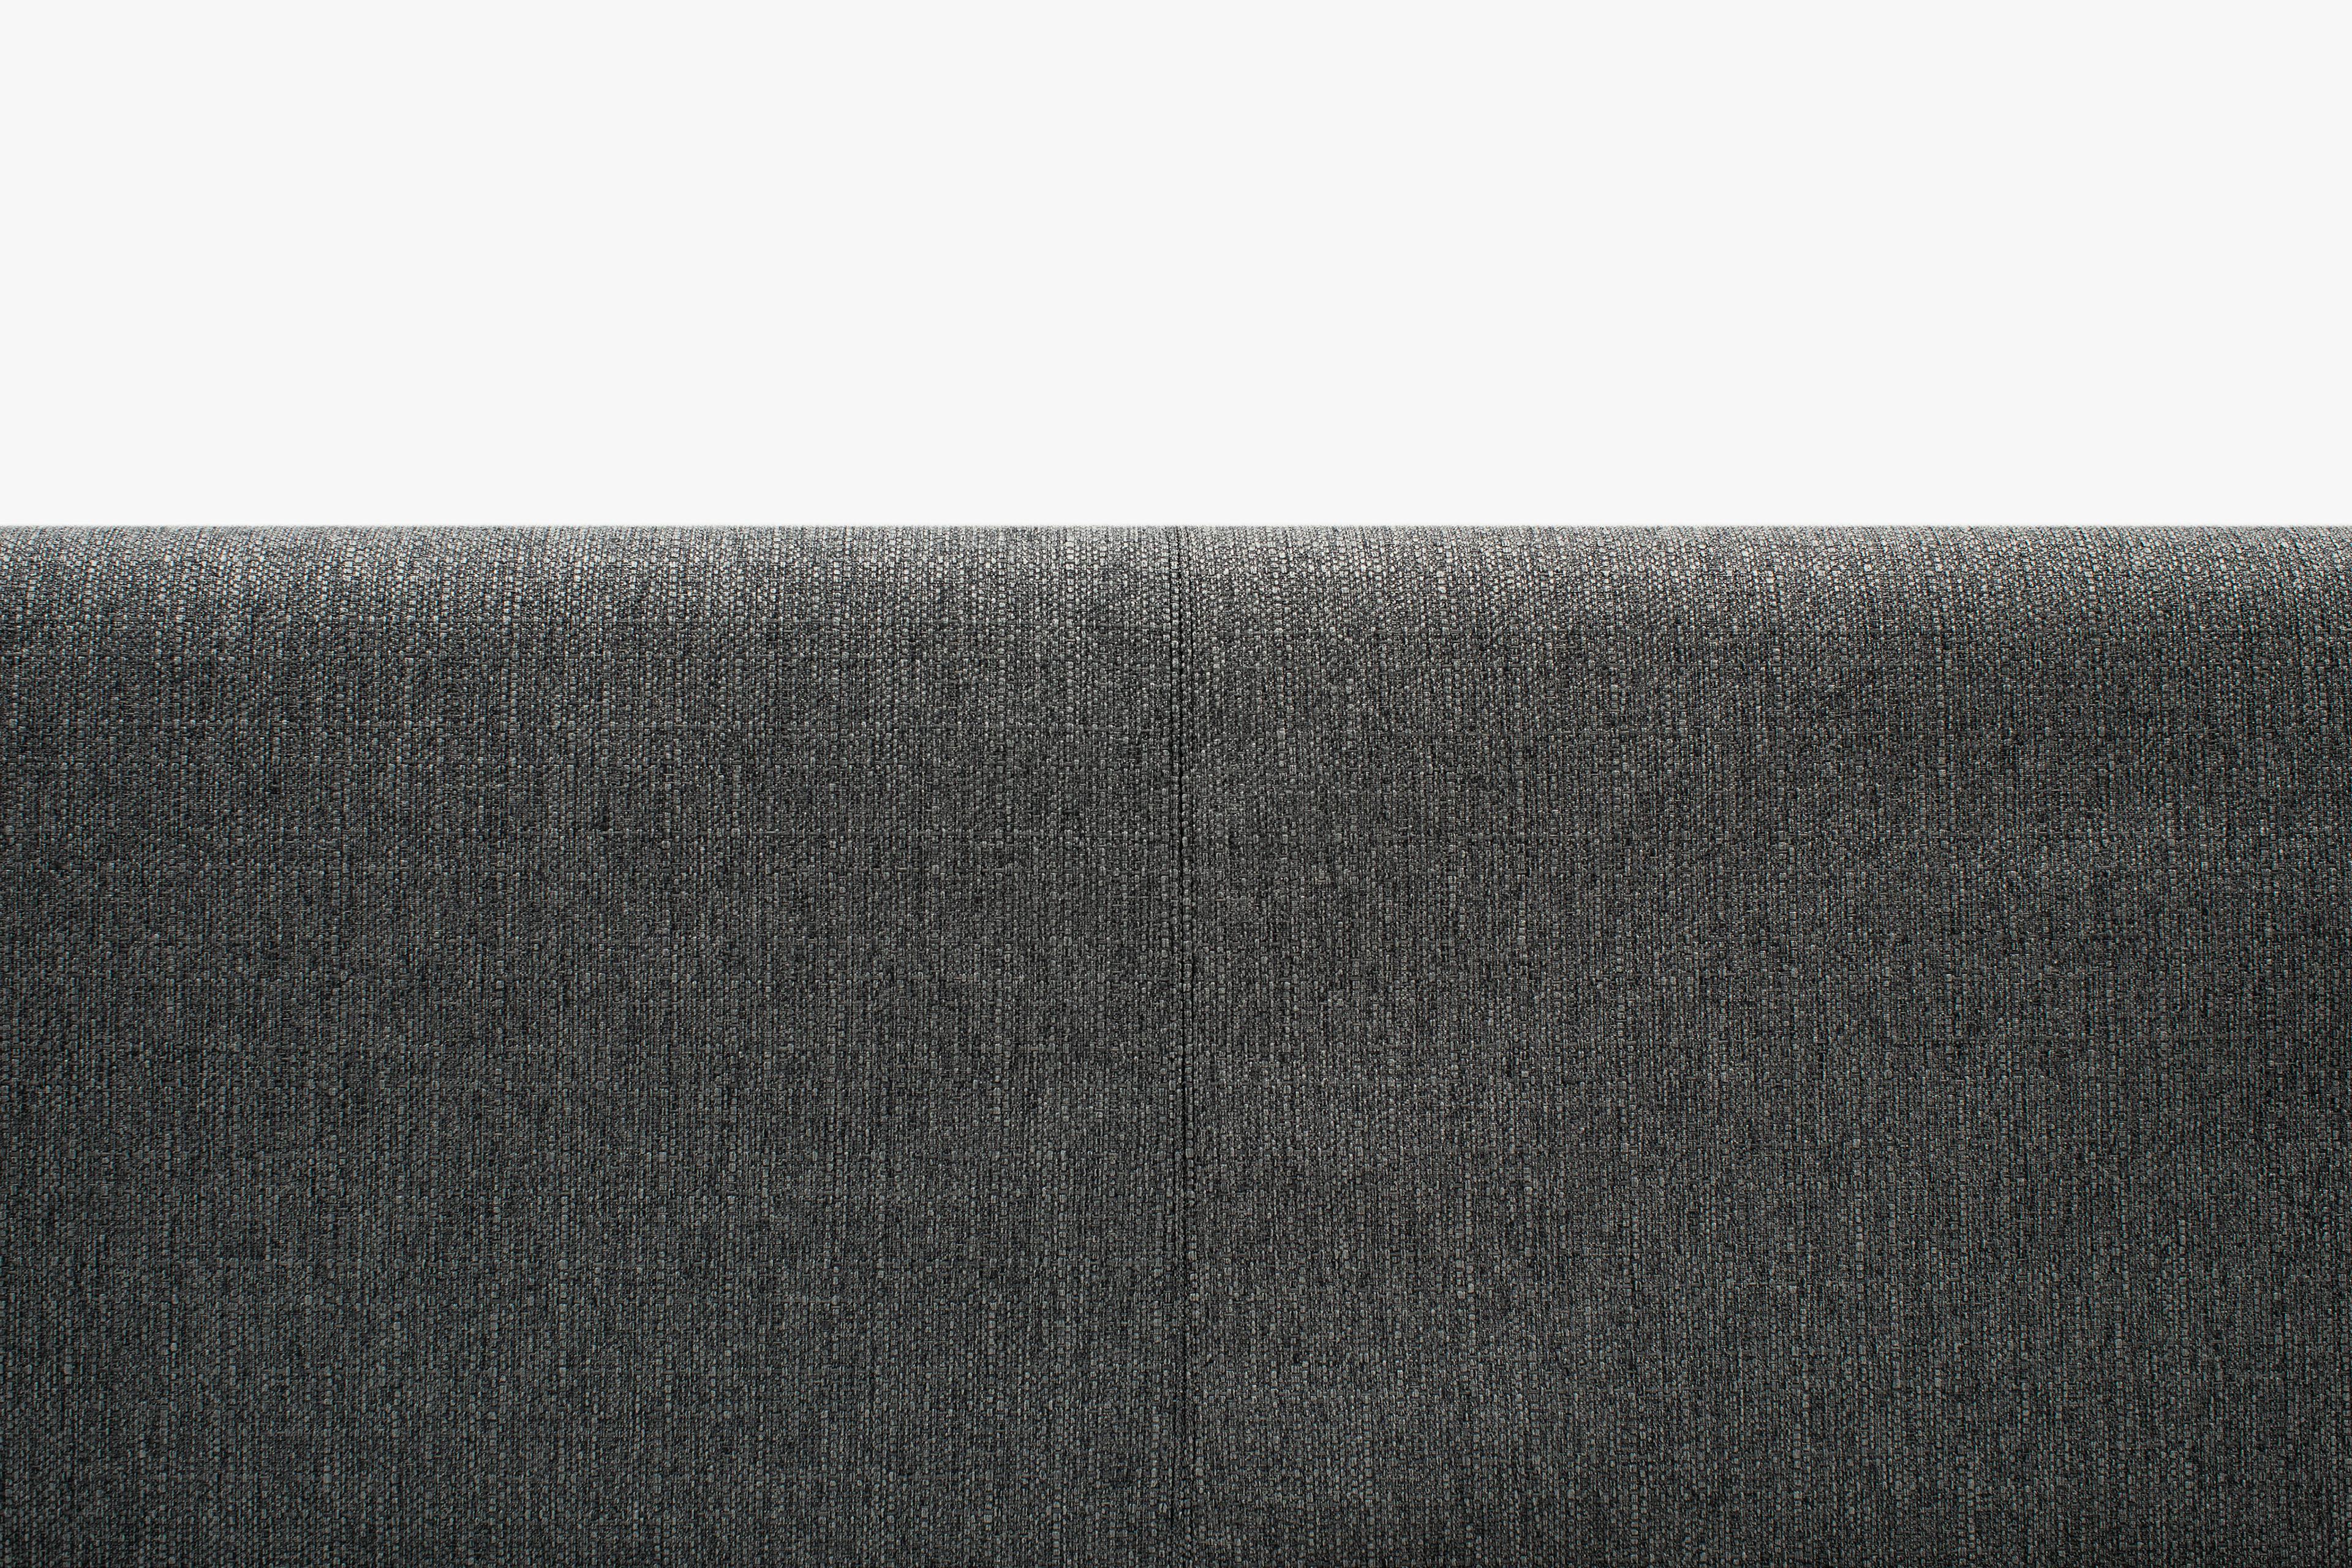 PDP Image: PillowBoard Cover (Linen Weave / Dark Charcoal) - 3:2 - Front